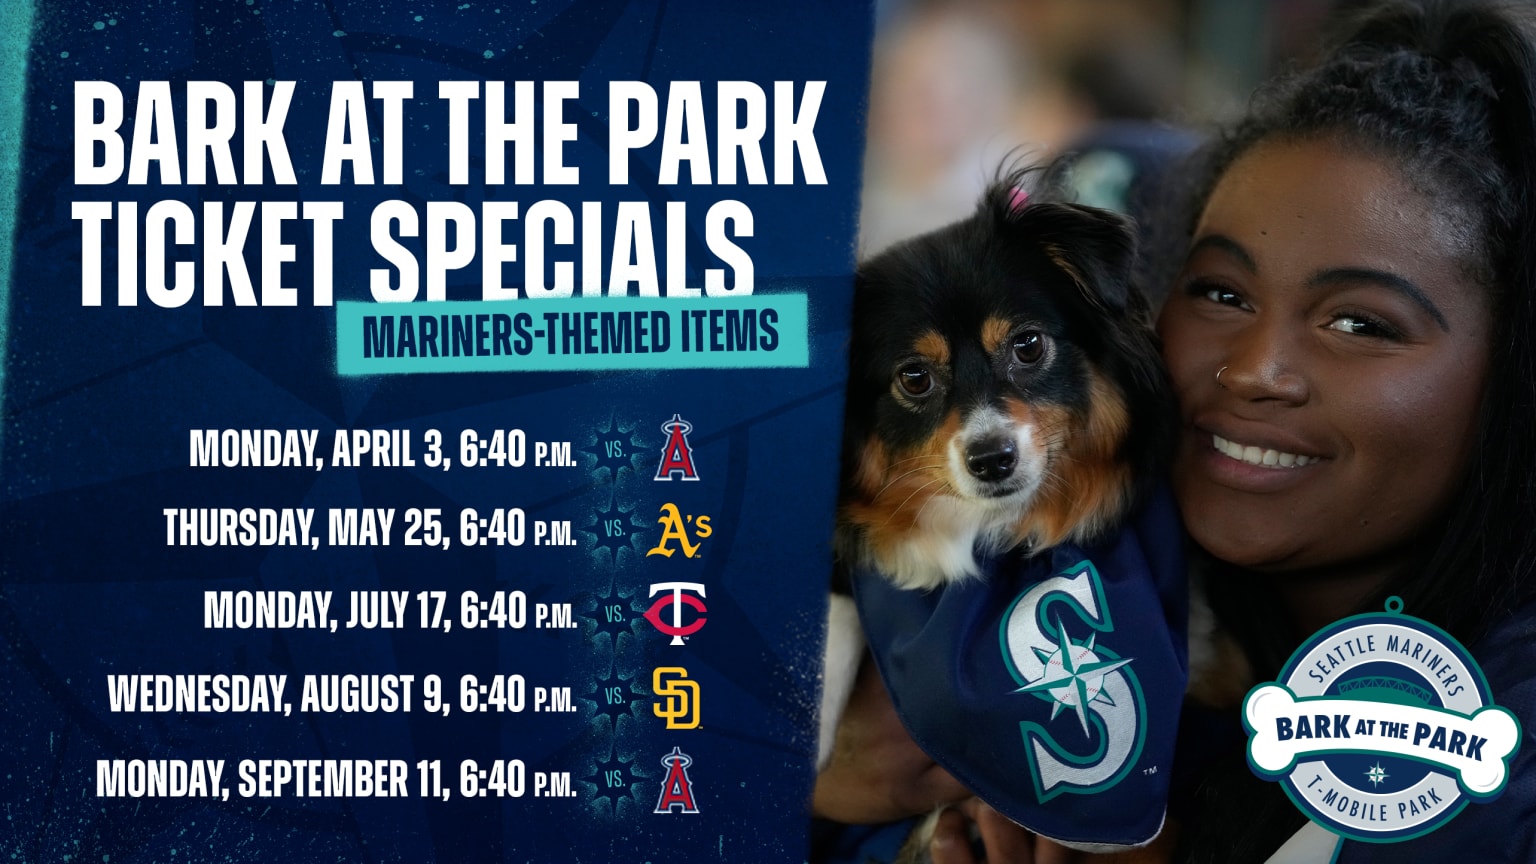 Bark at the Park Seattle Mariners